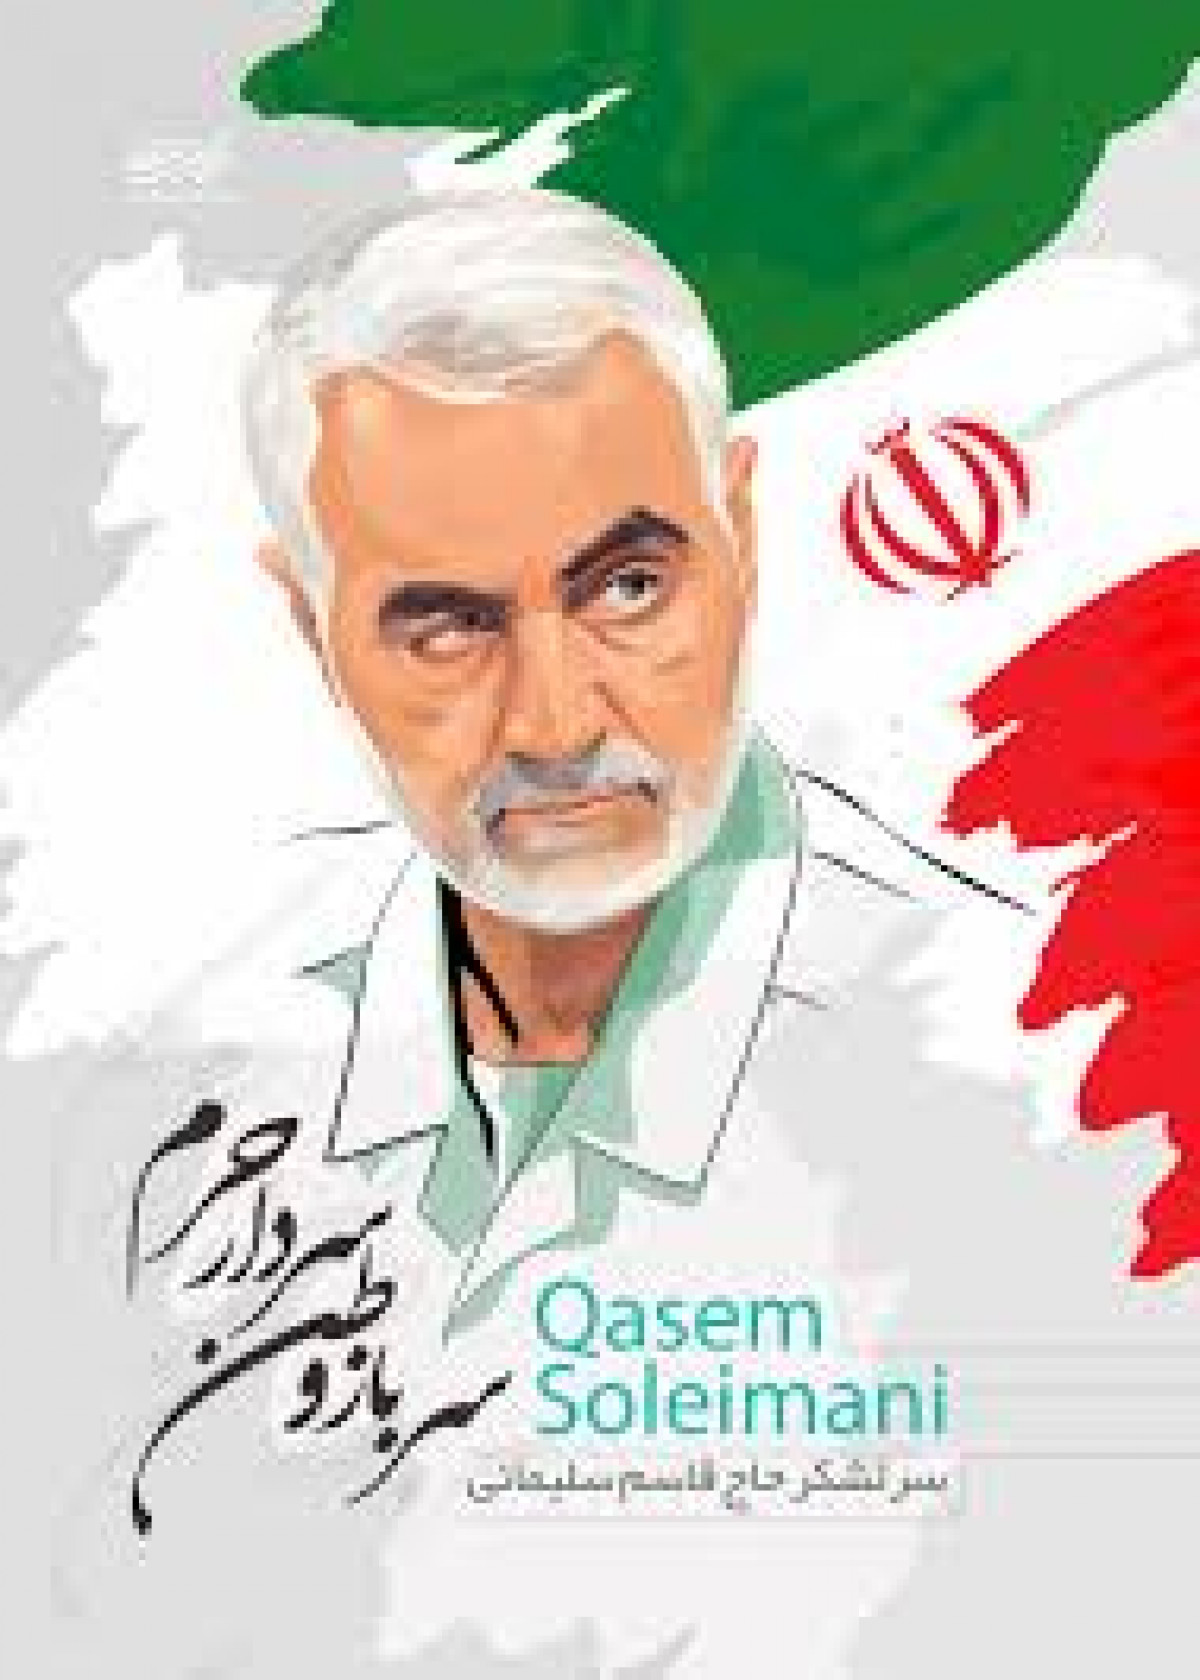 Here’s How Iranians React to Soleimani’s Assasination